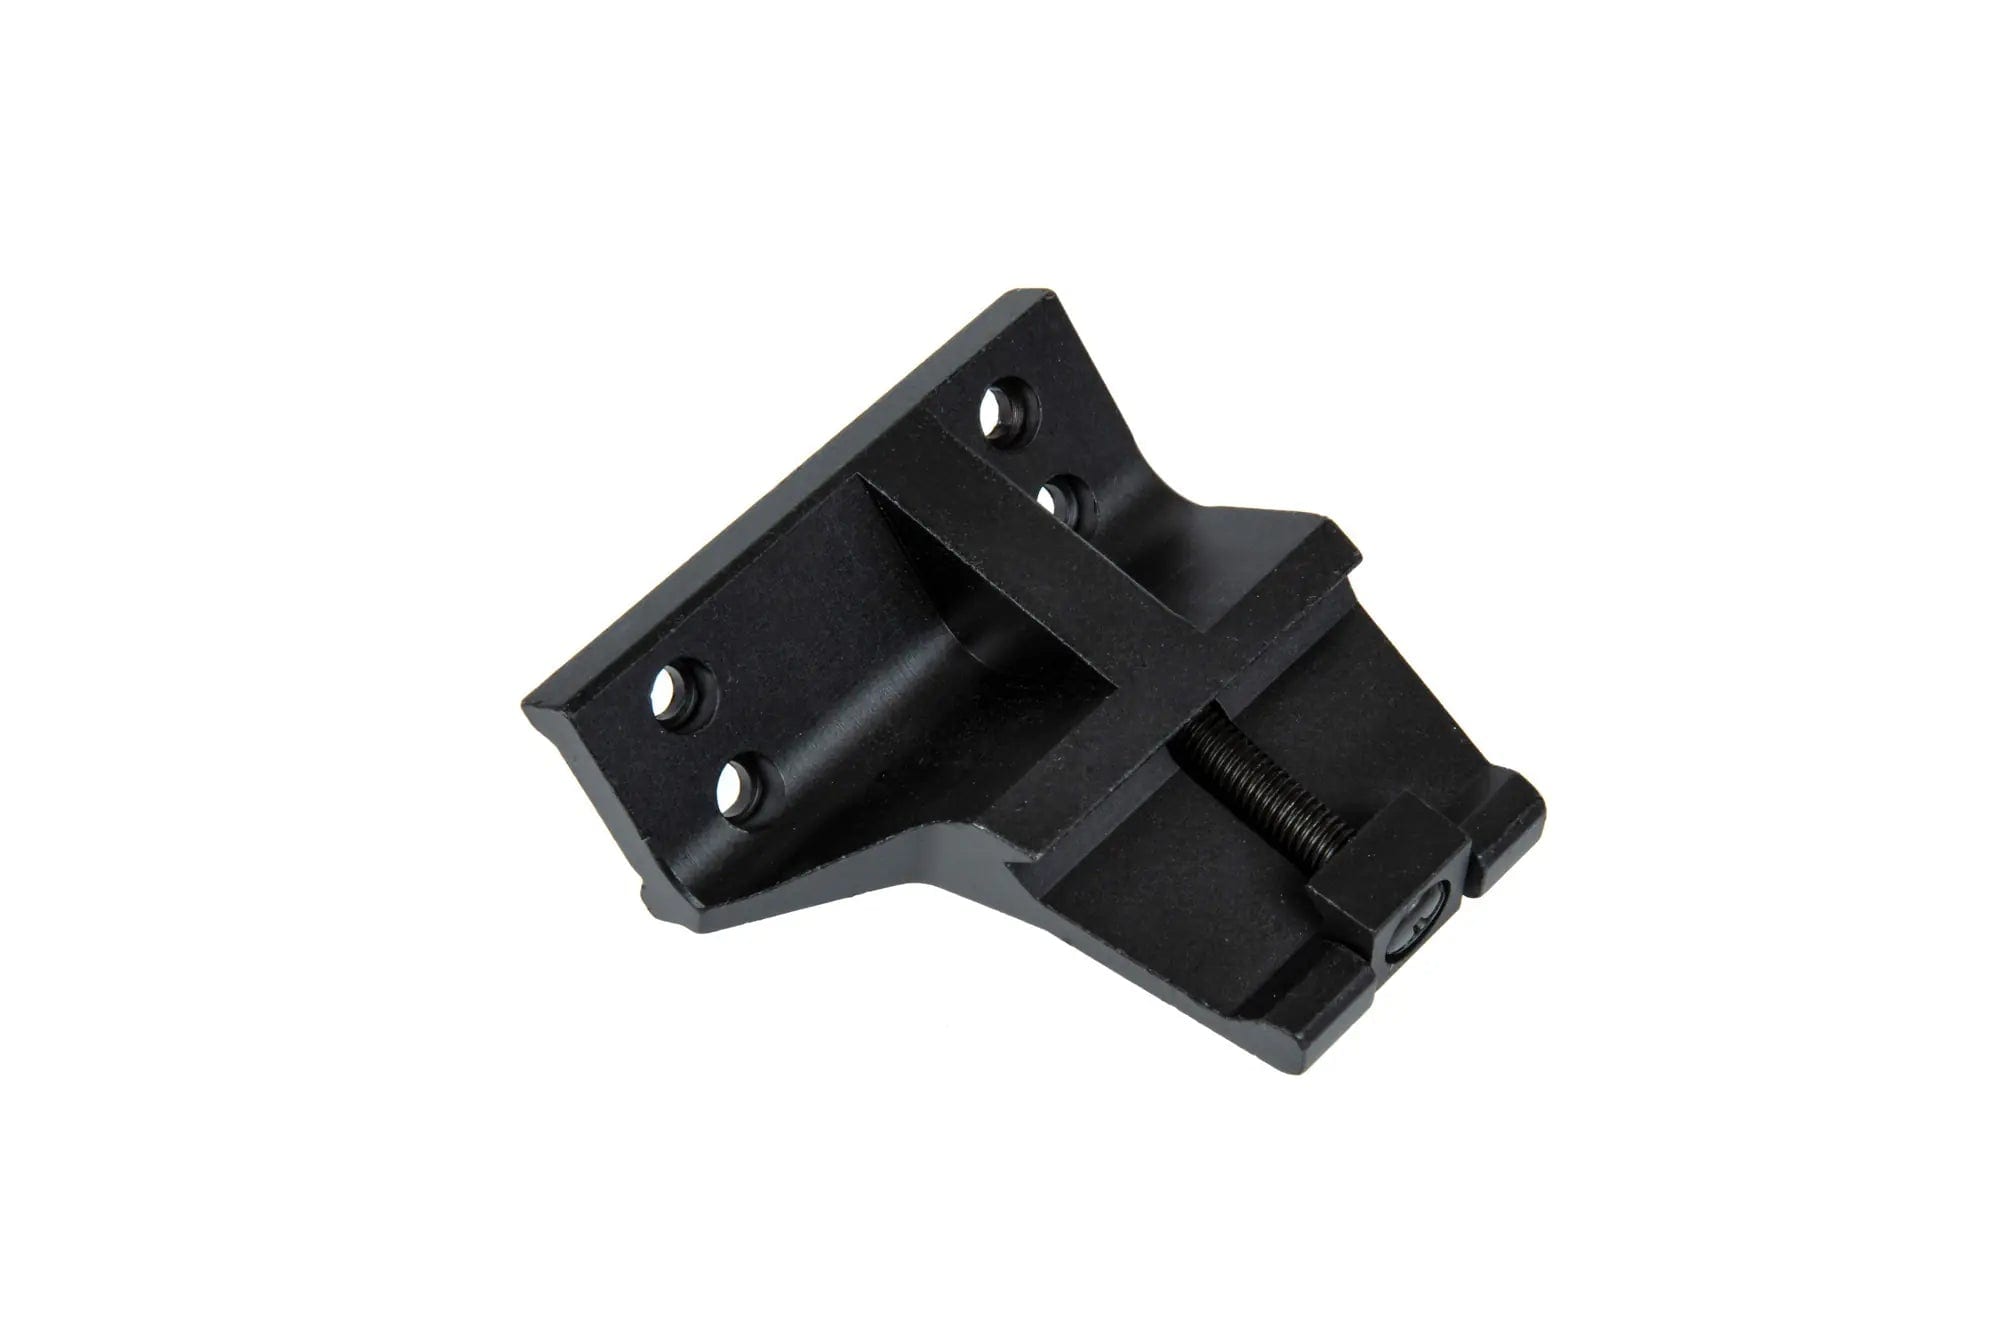 KAC Style 45° Mount for T1/T2 Red Dot